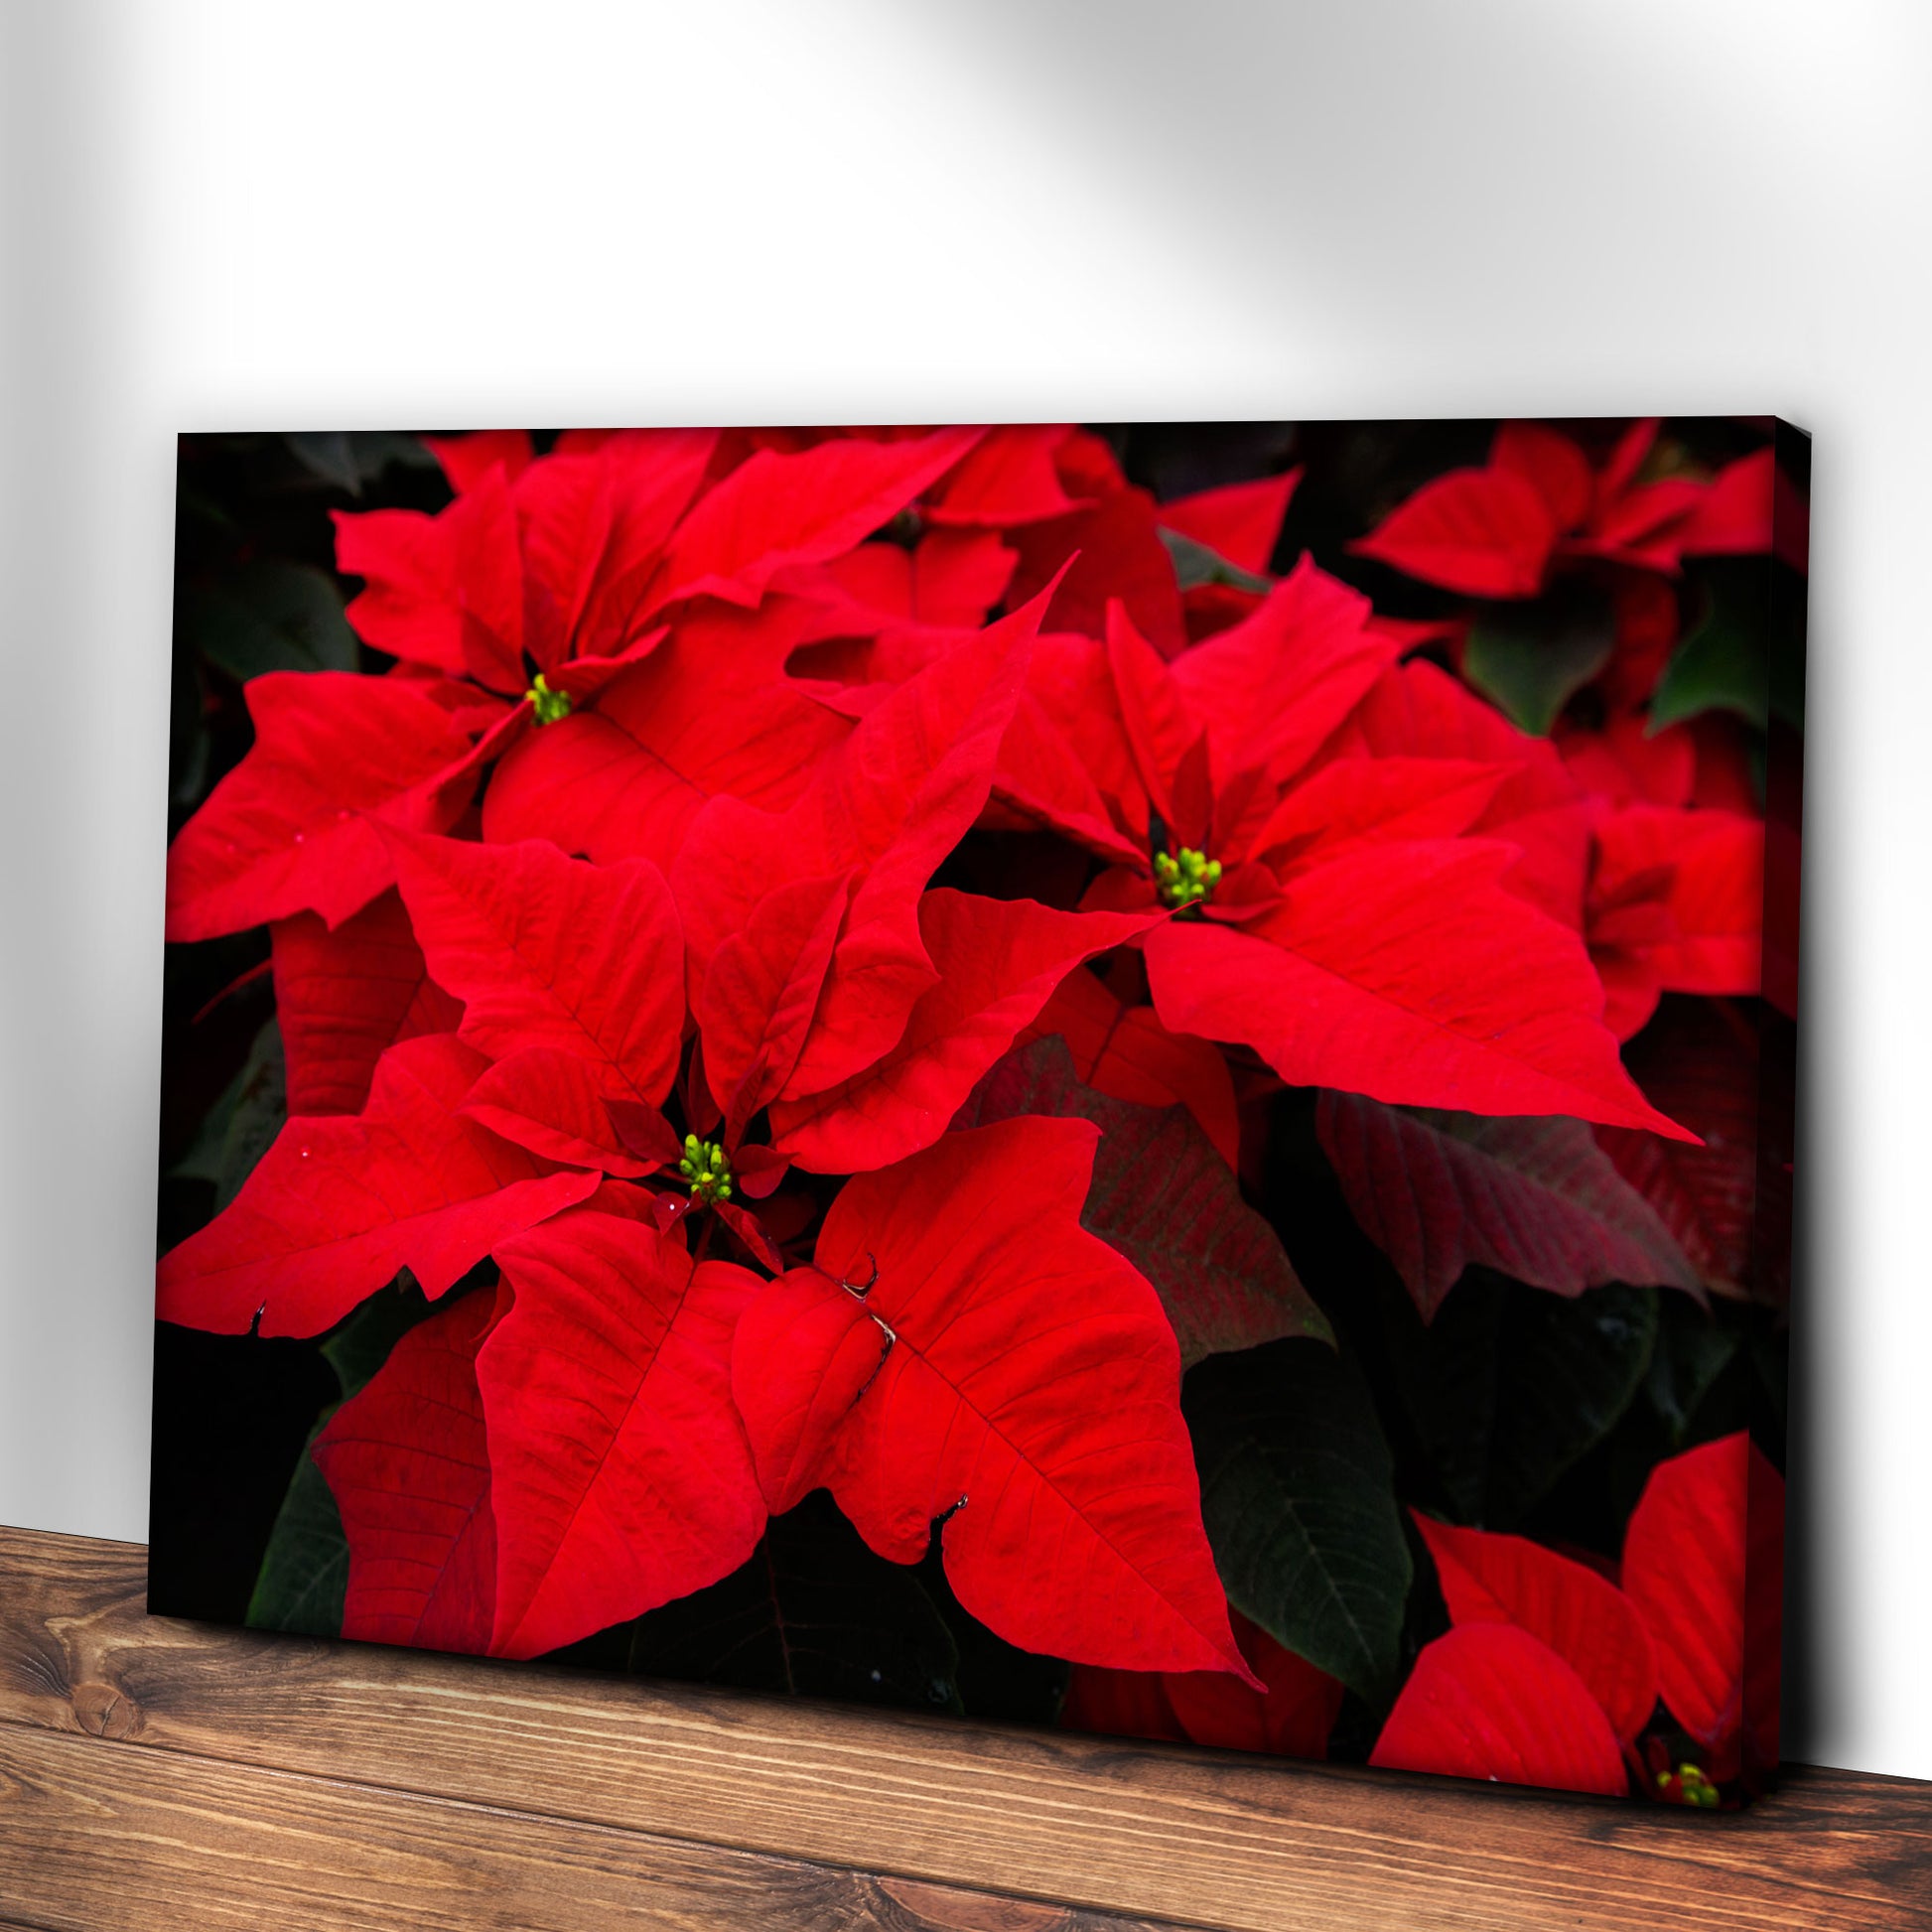 Flowers Poinsettia Crimson Canvas Wall Art Style 2 - Image by Tailored Canvases